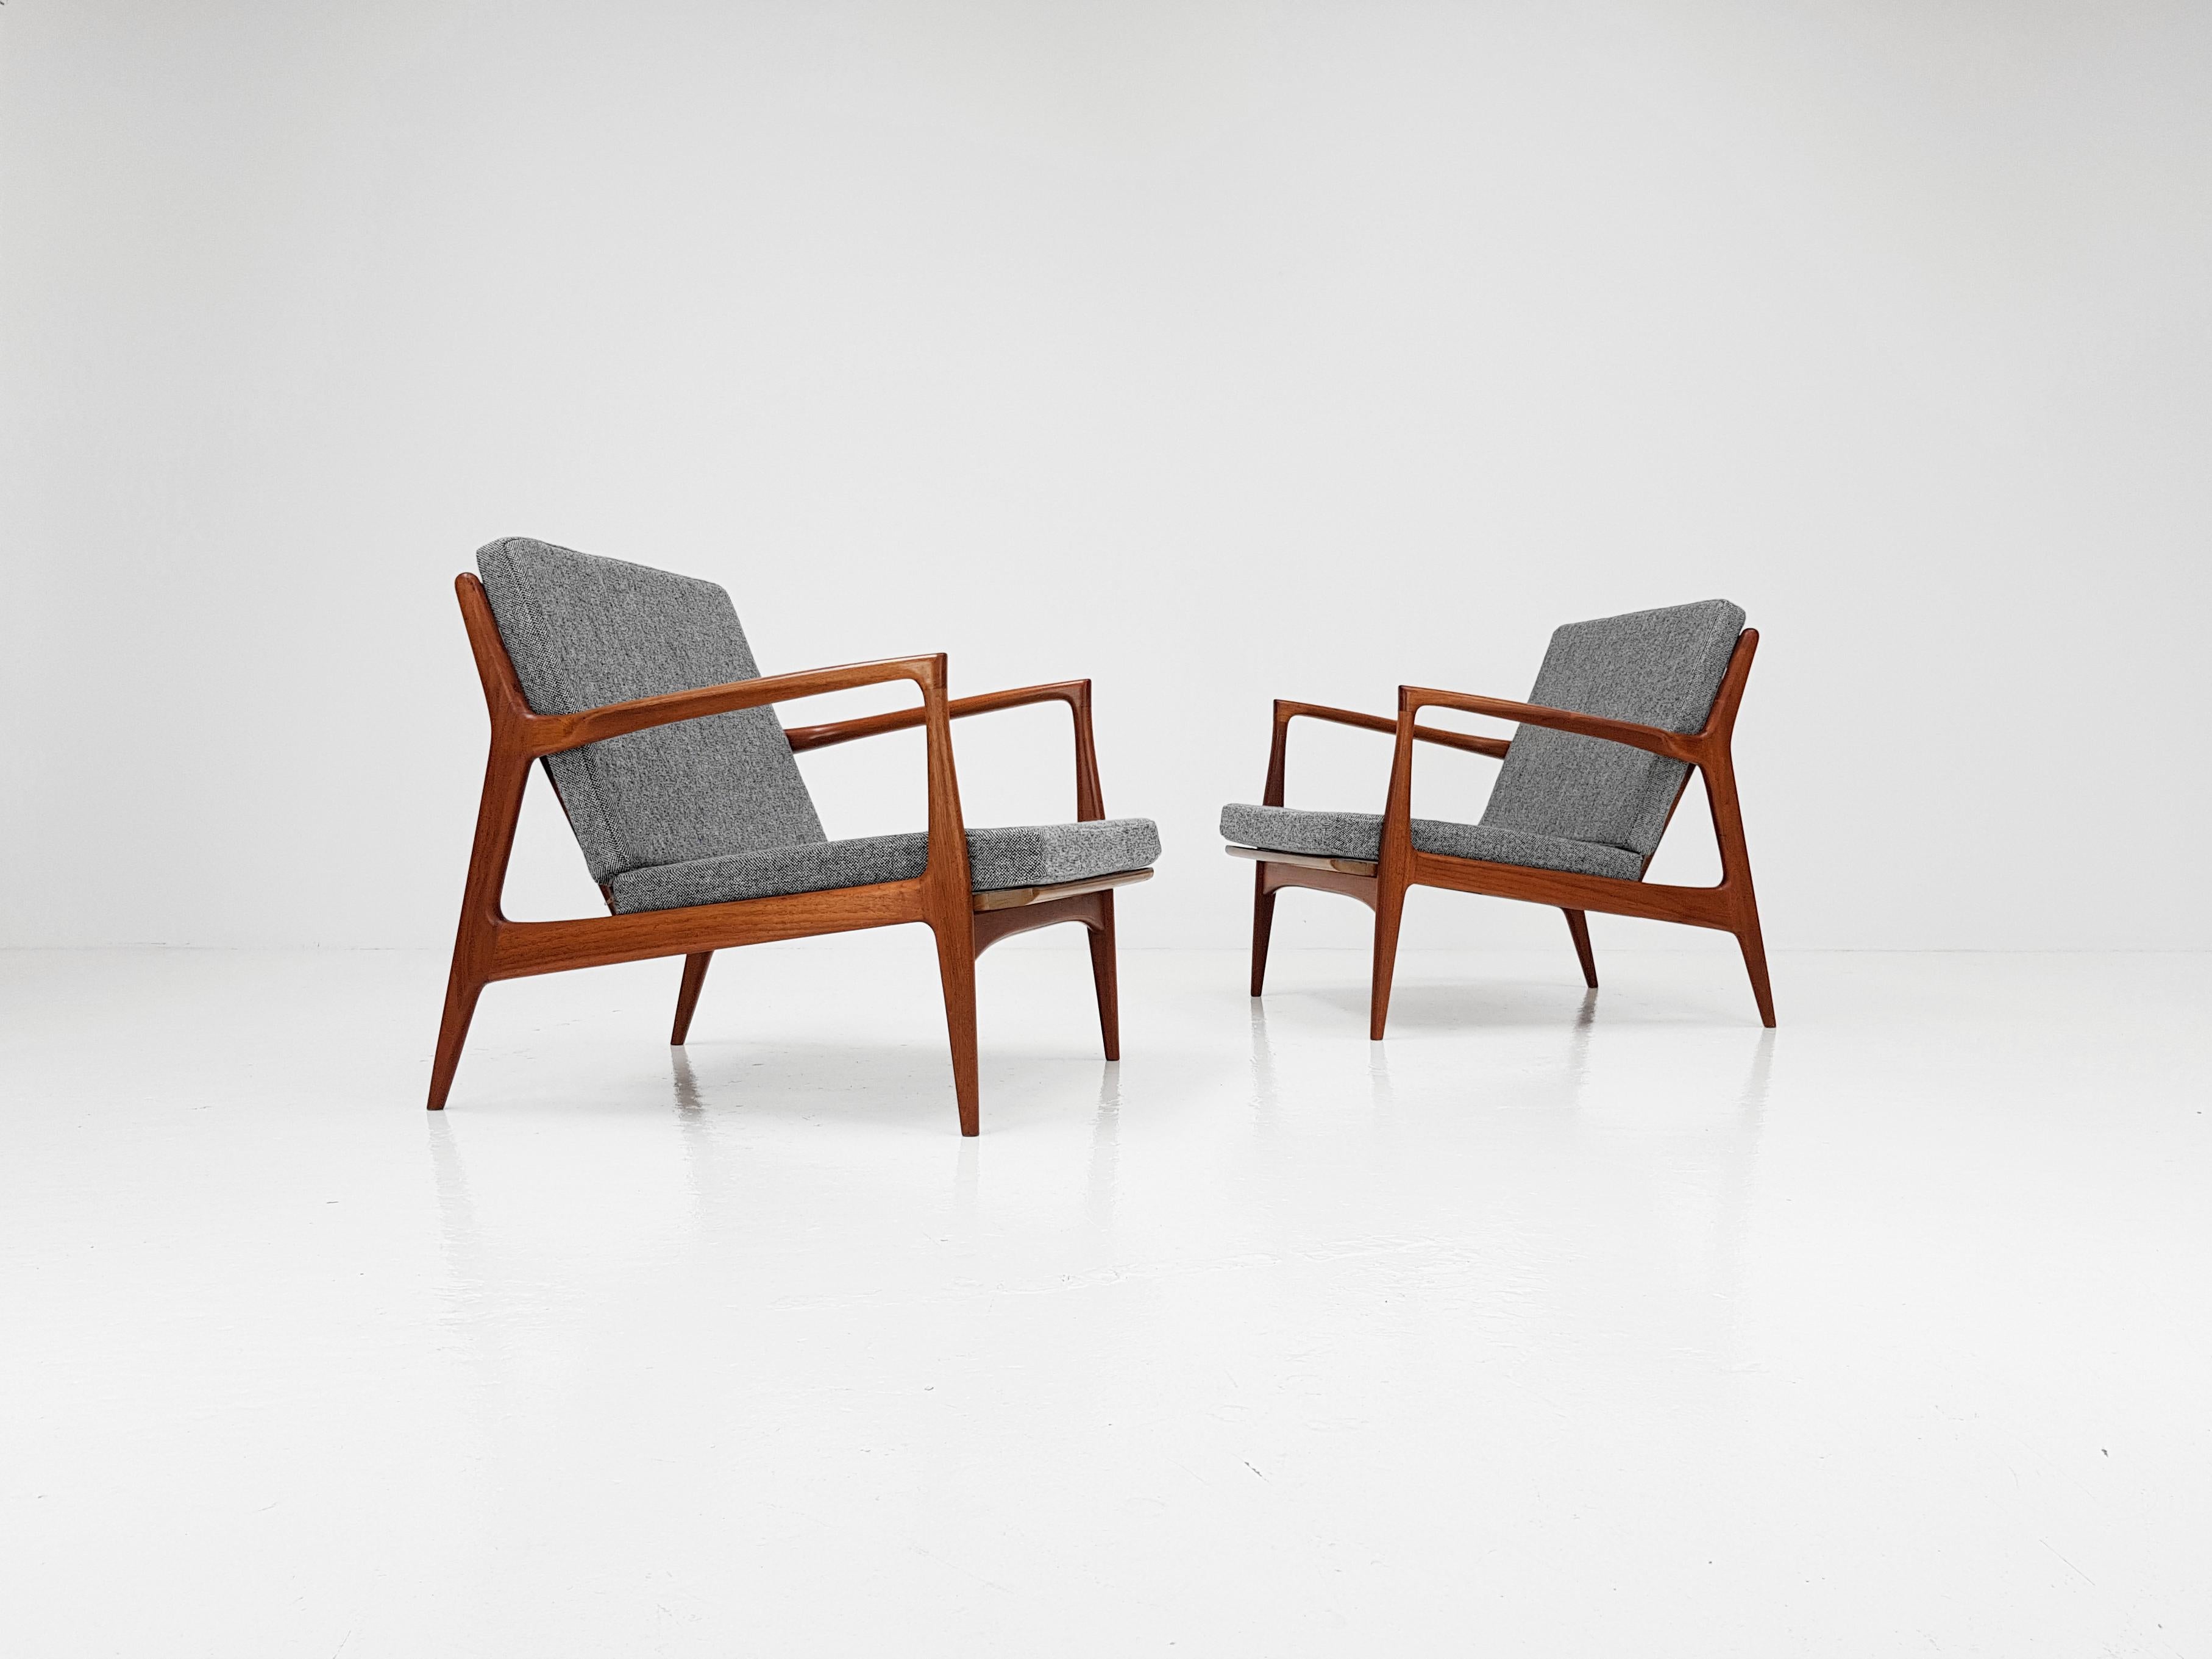 A stunning pair of Danish armchairs by Chr. Jensen of Haslev. Newly upholstered in Kvadrat Hallingdal 126 fabric.

Refinished, reupholstered, rewebbed.

We provide competitive global shipping rates - please contact to discuss.




